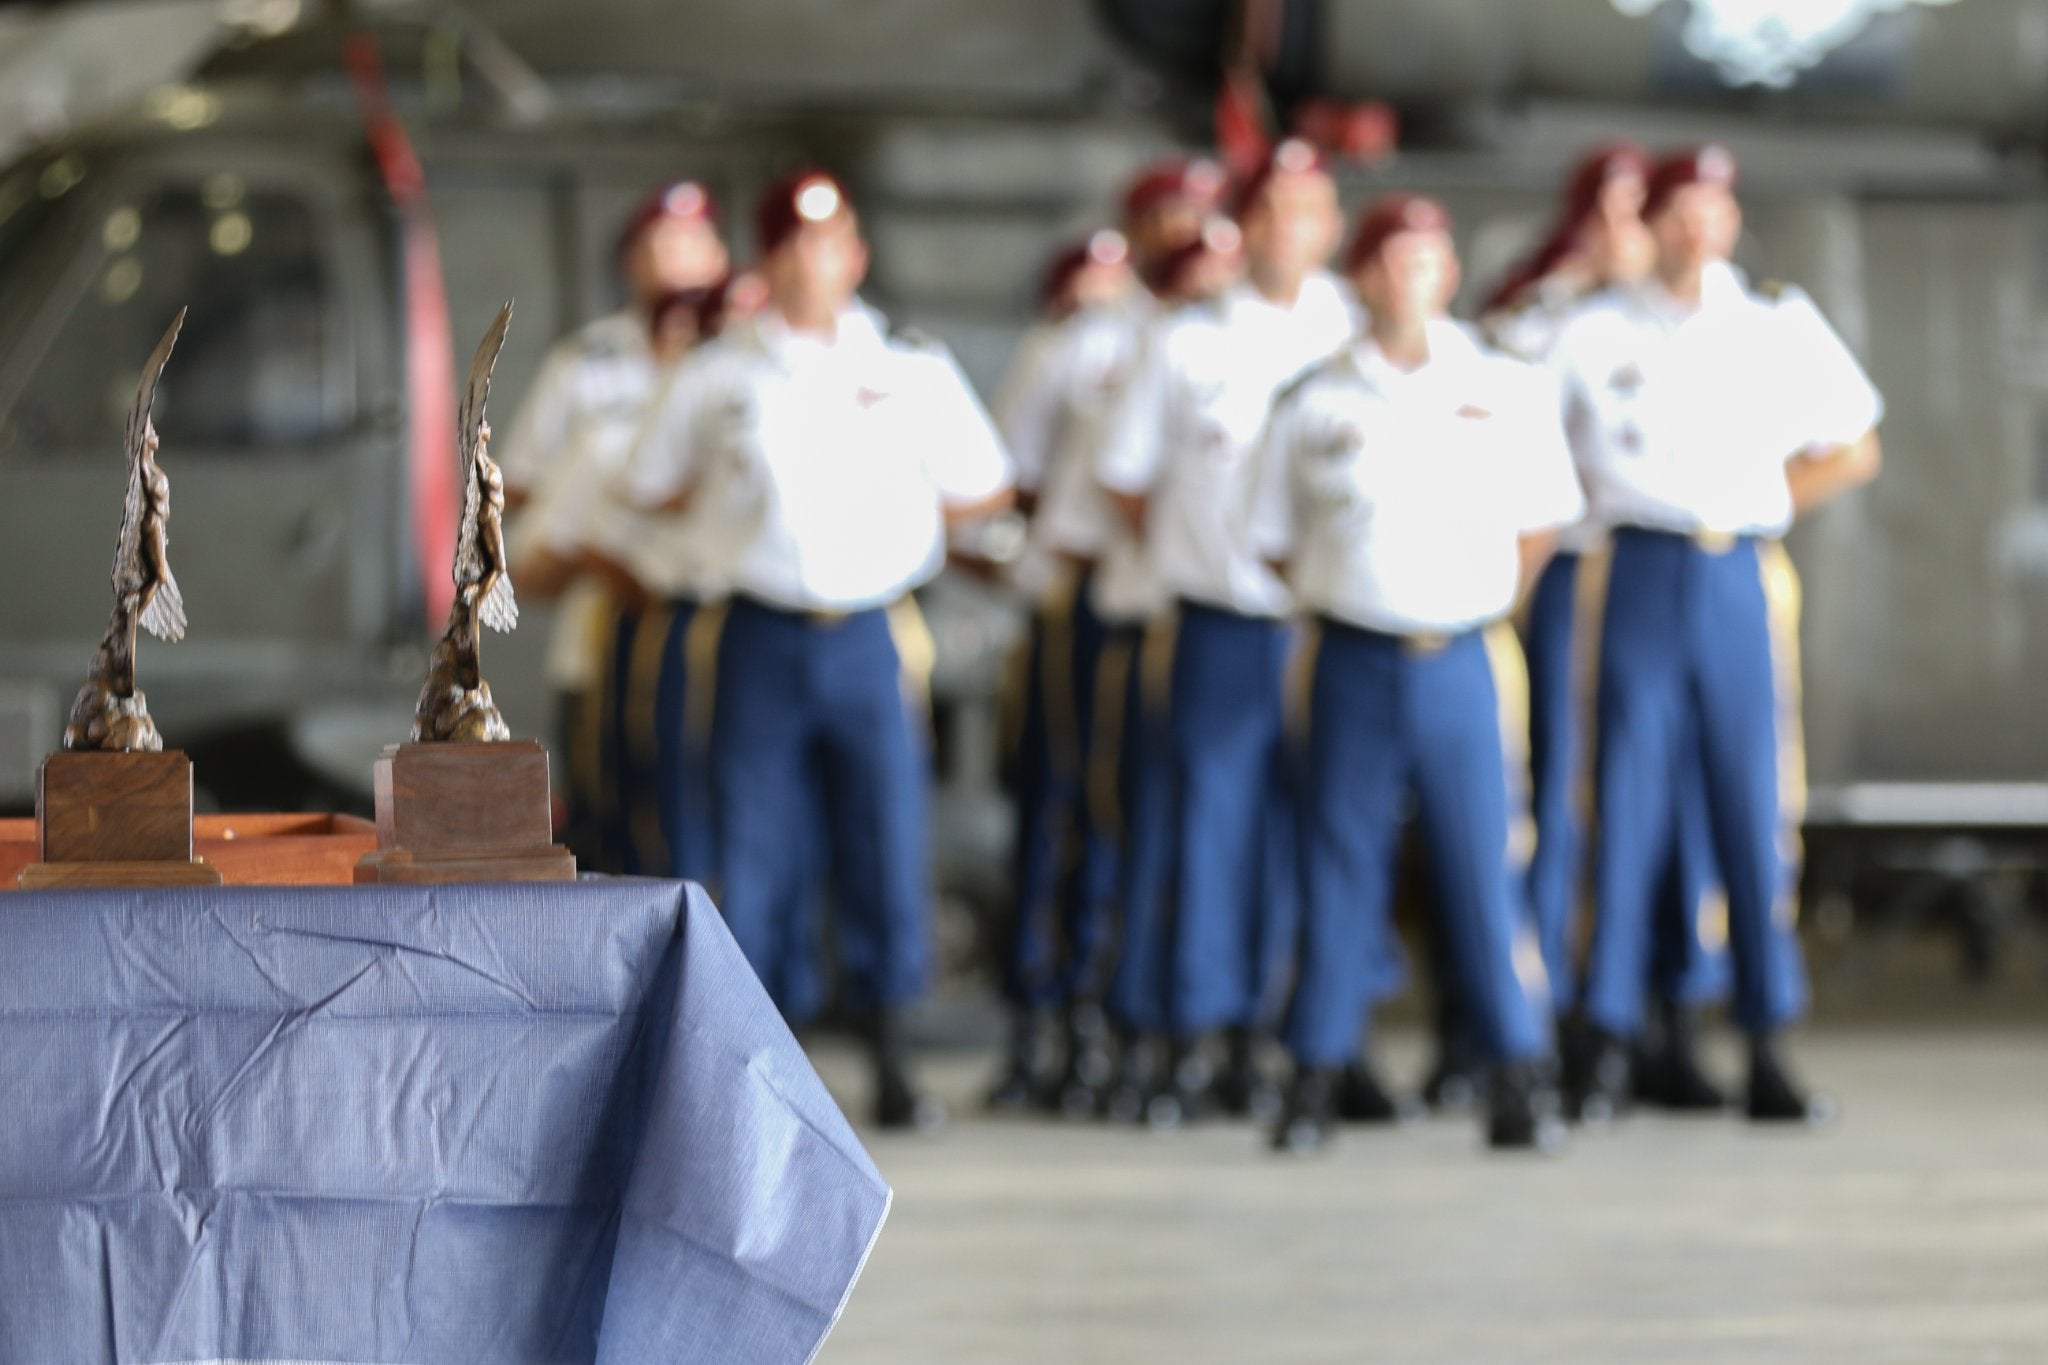 The 82nd Airborne awarded soldiers for the Kabul evacuation, then took the medals back for now